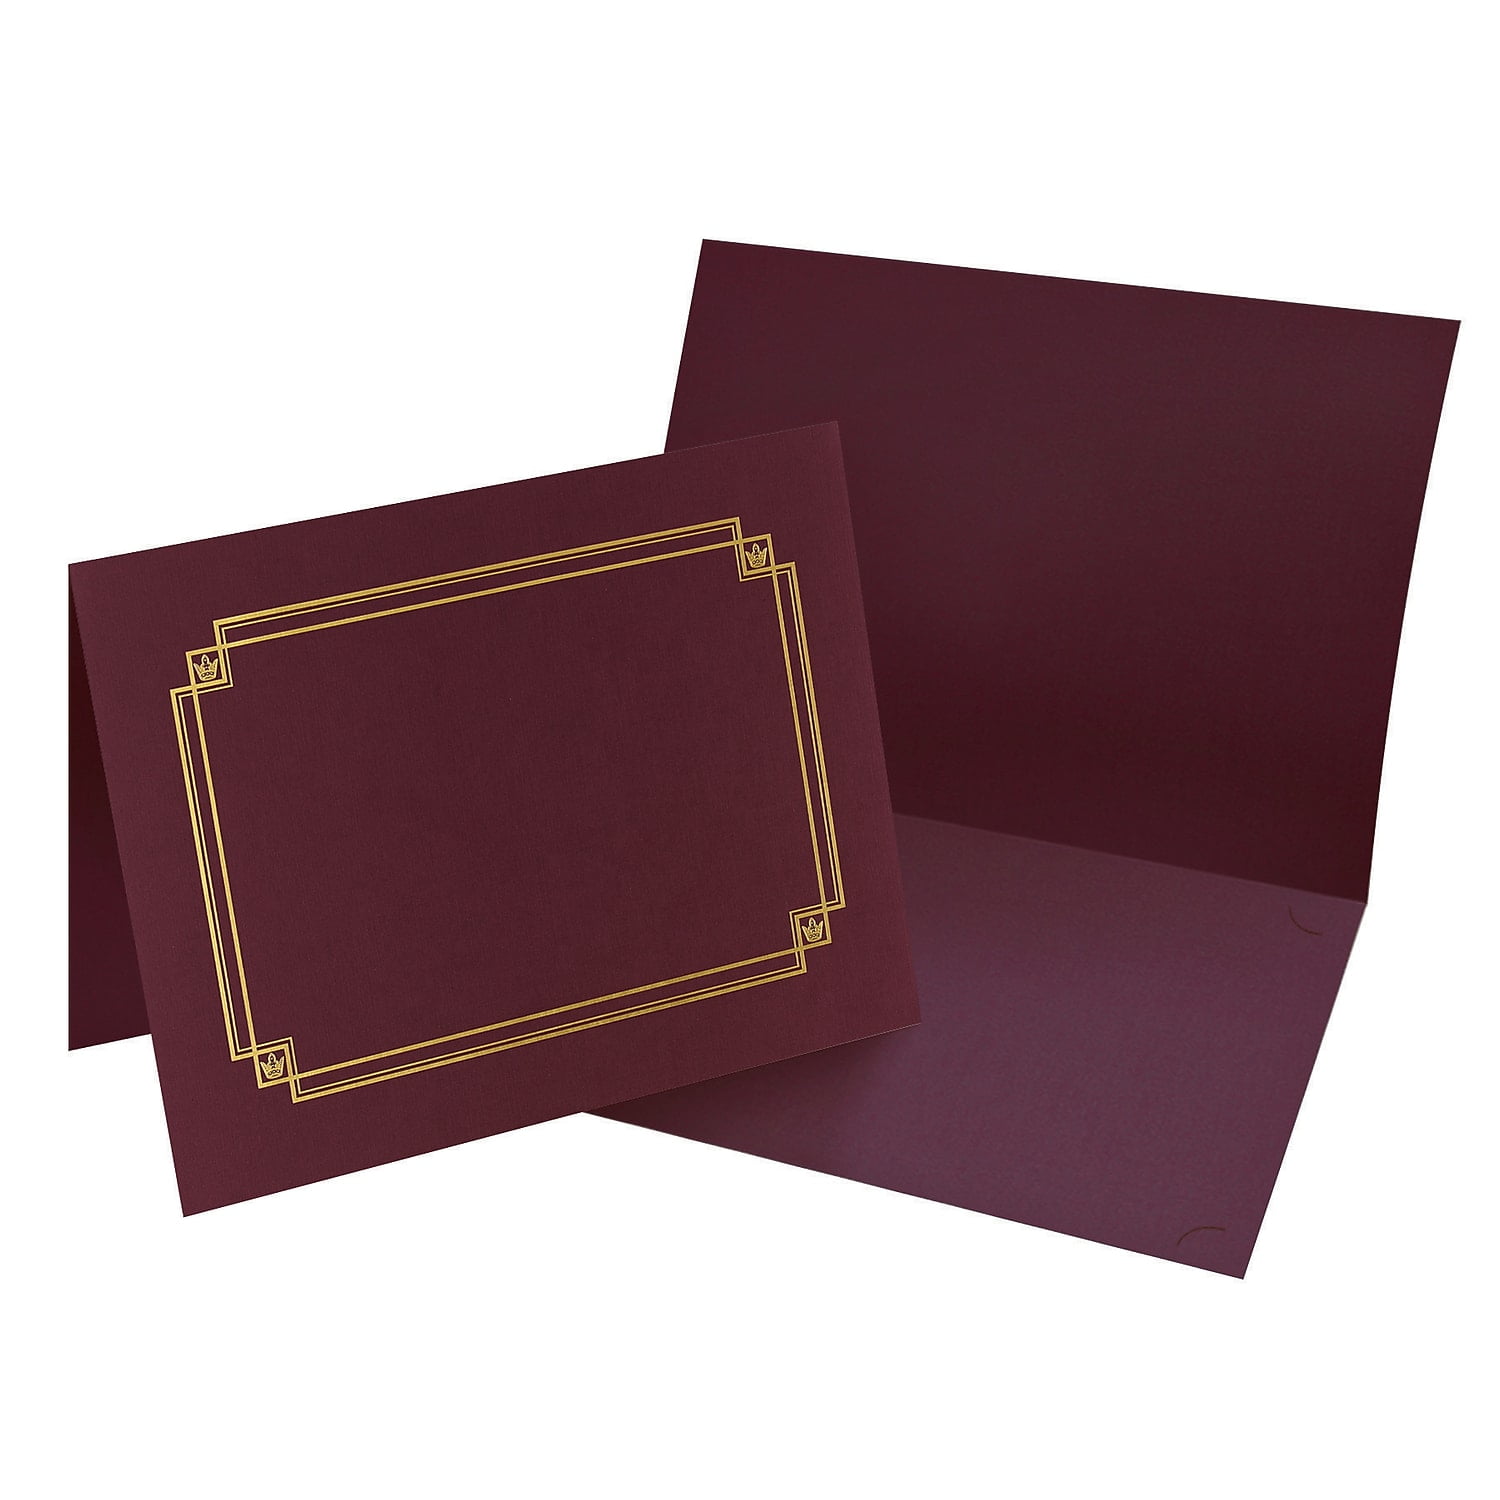 in faulk Leather look stitch BURGUNDY MASONIC LEATHER CERTIFICATE HOLDER 